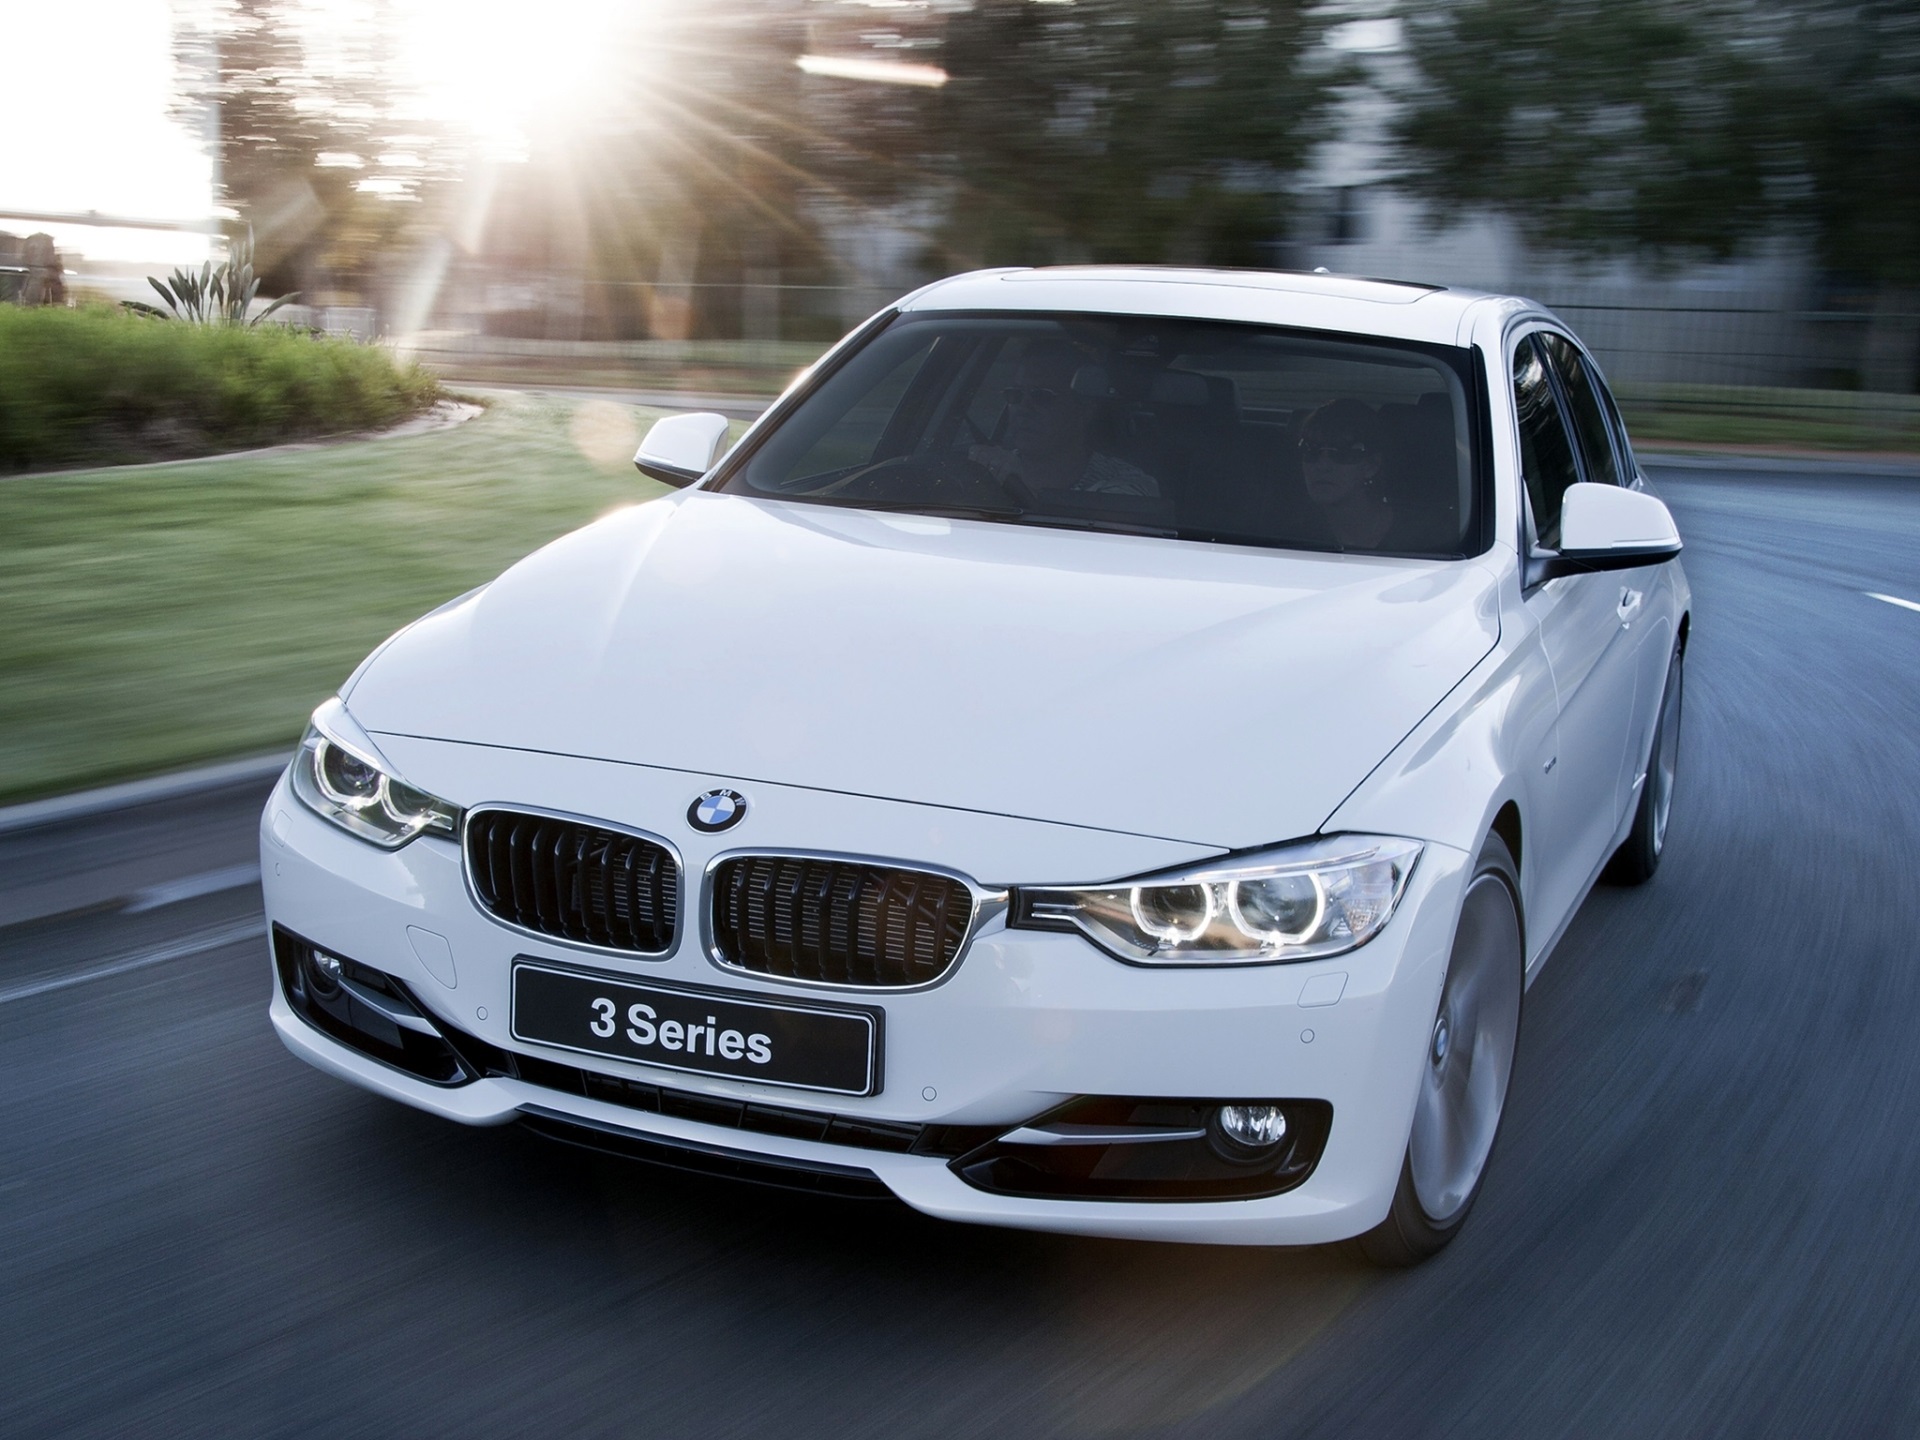 Wallpaper BMW 328i white car at road 1920x1440 HD Picture, Image